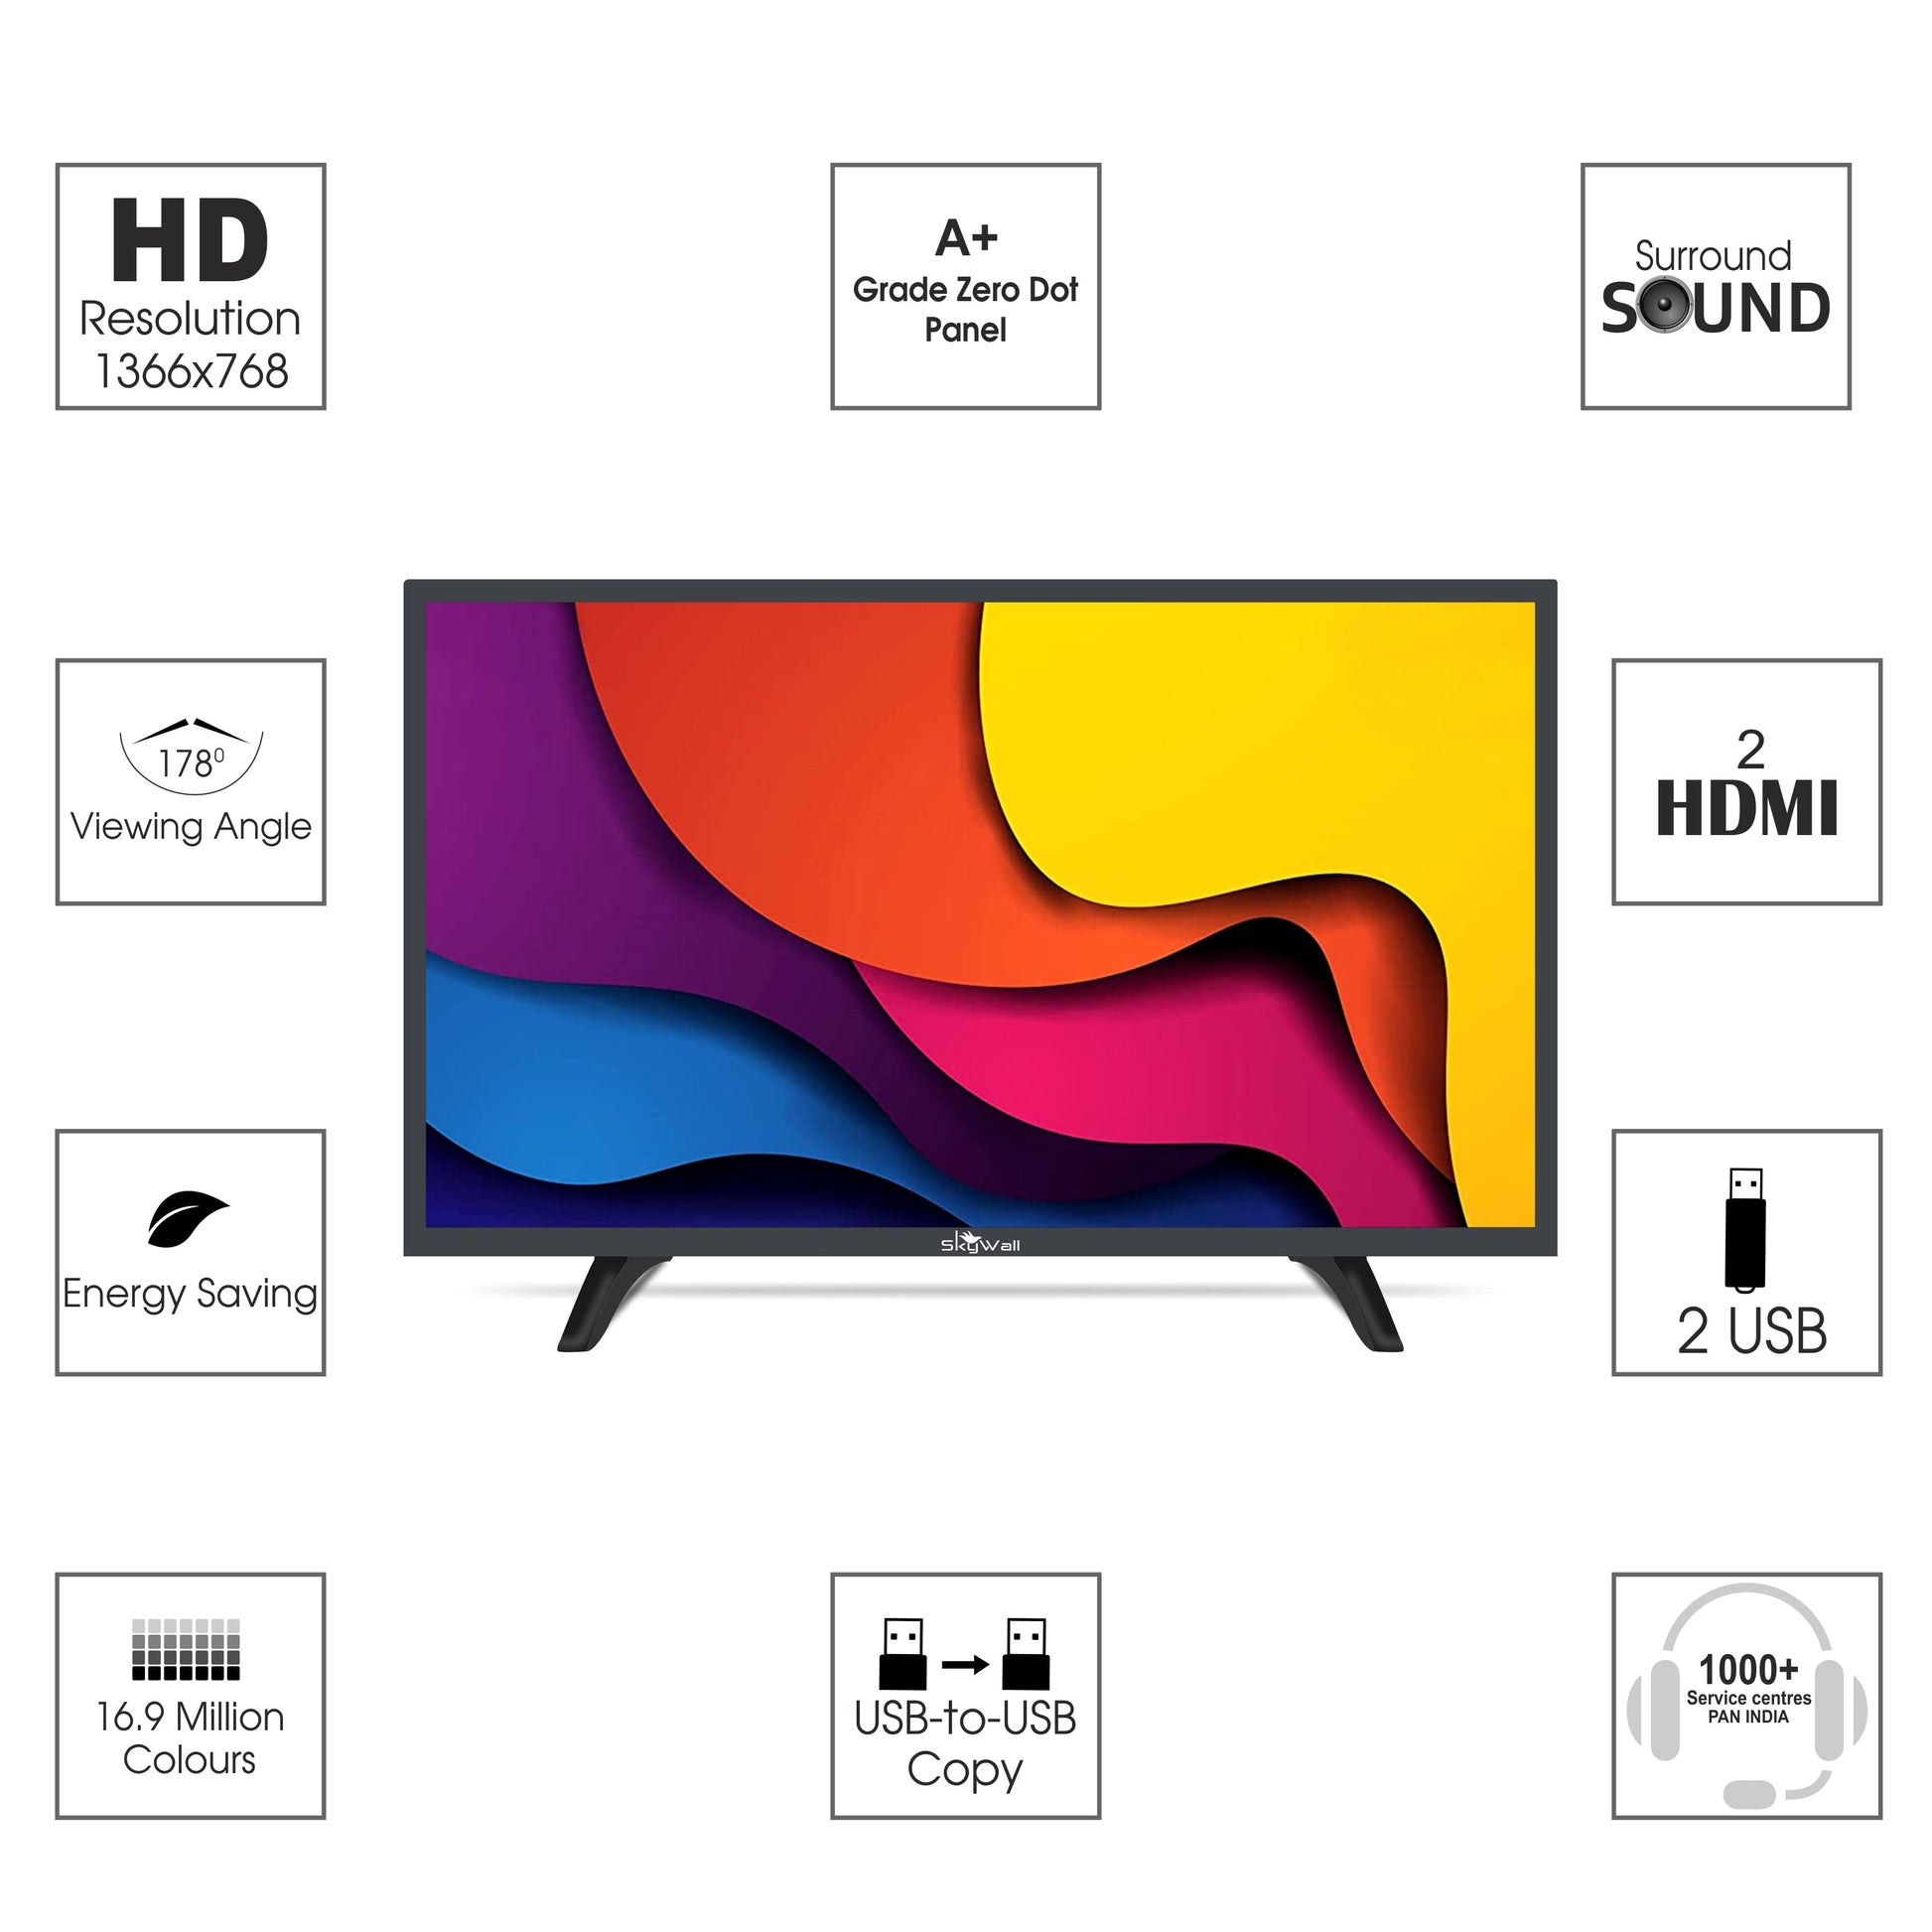 SkyWall™ TV HD Ready TV SkyWall 80 cm (32 inches) HD Ready LED TV 32SWATV With A+ Grade Panel (slim bezels)